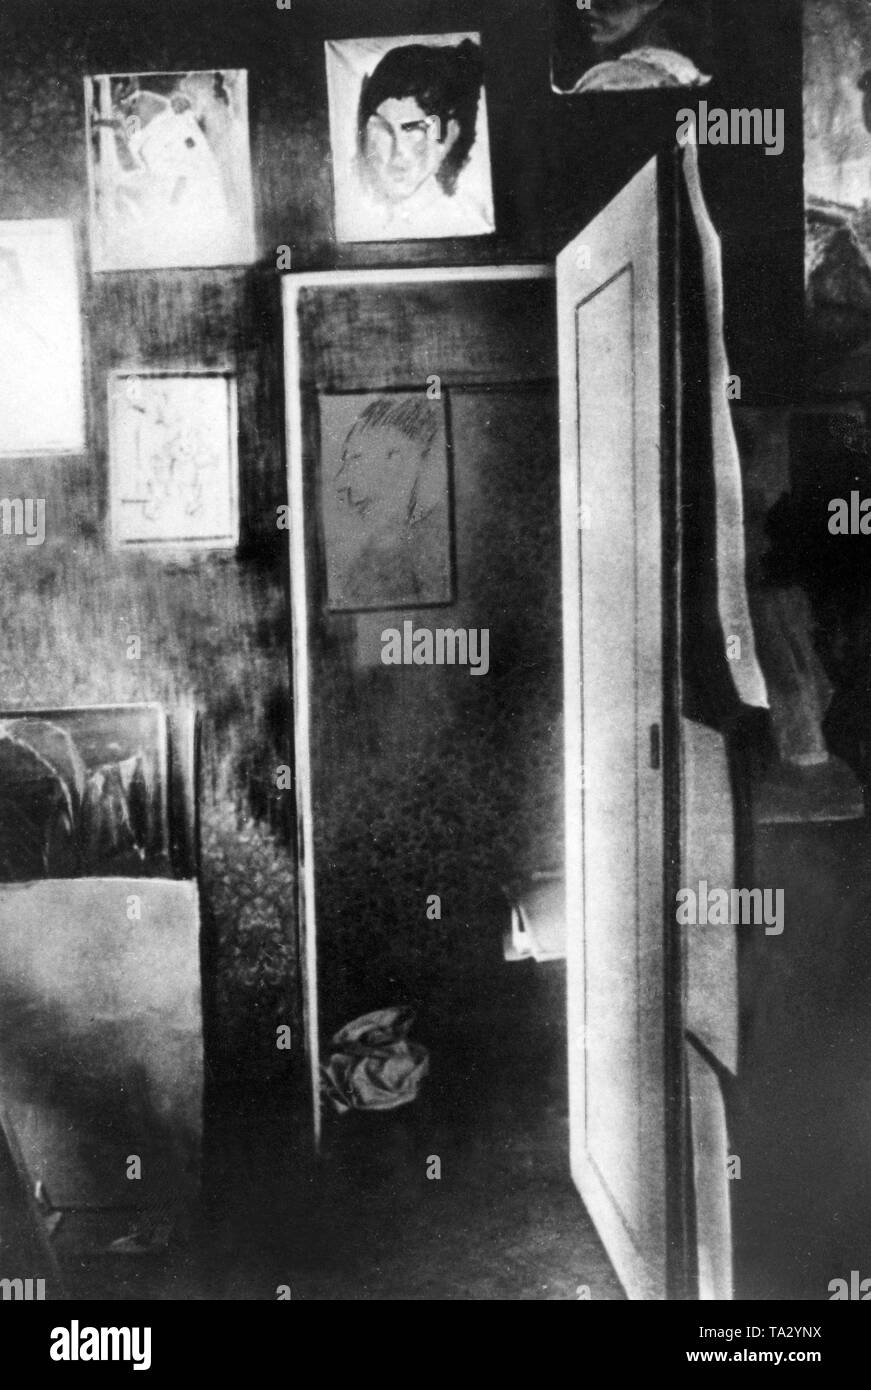 After the end of the Soviet Republic in Bavaria, the writer Ernst Toller fled from the terror of white troops and hid in a chamber in the Schwabing painting studio of Johannes Reichel, where he was arrested on 4 June 1919. The picture shows the open tapet door, the joints of which had been hidden with pictures hung over it and behind which Toller sought refuge. Stock Photo